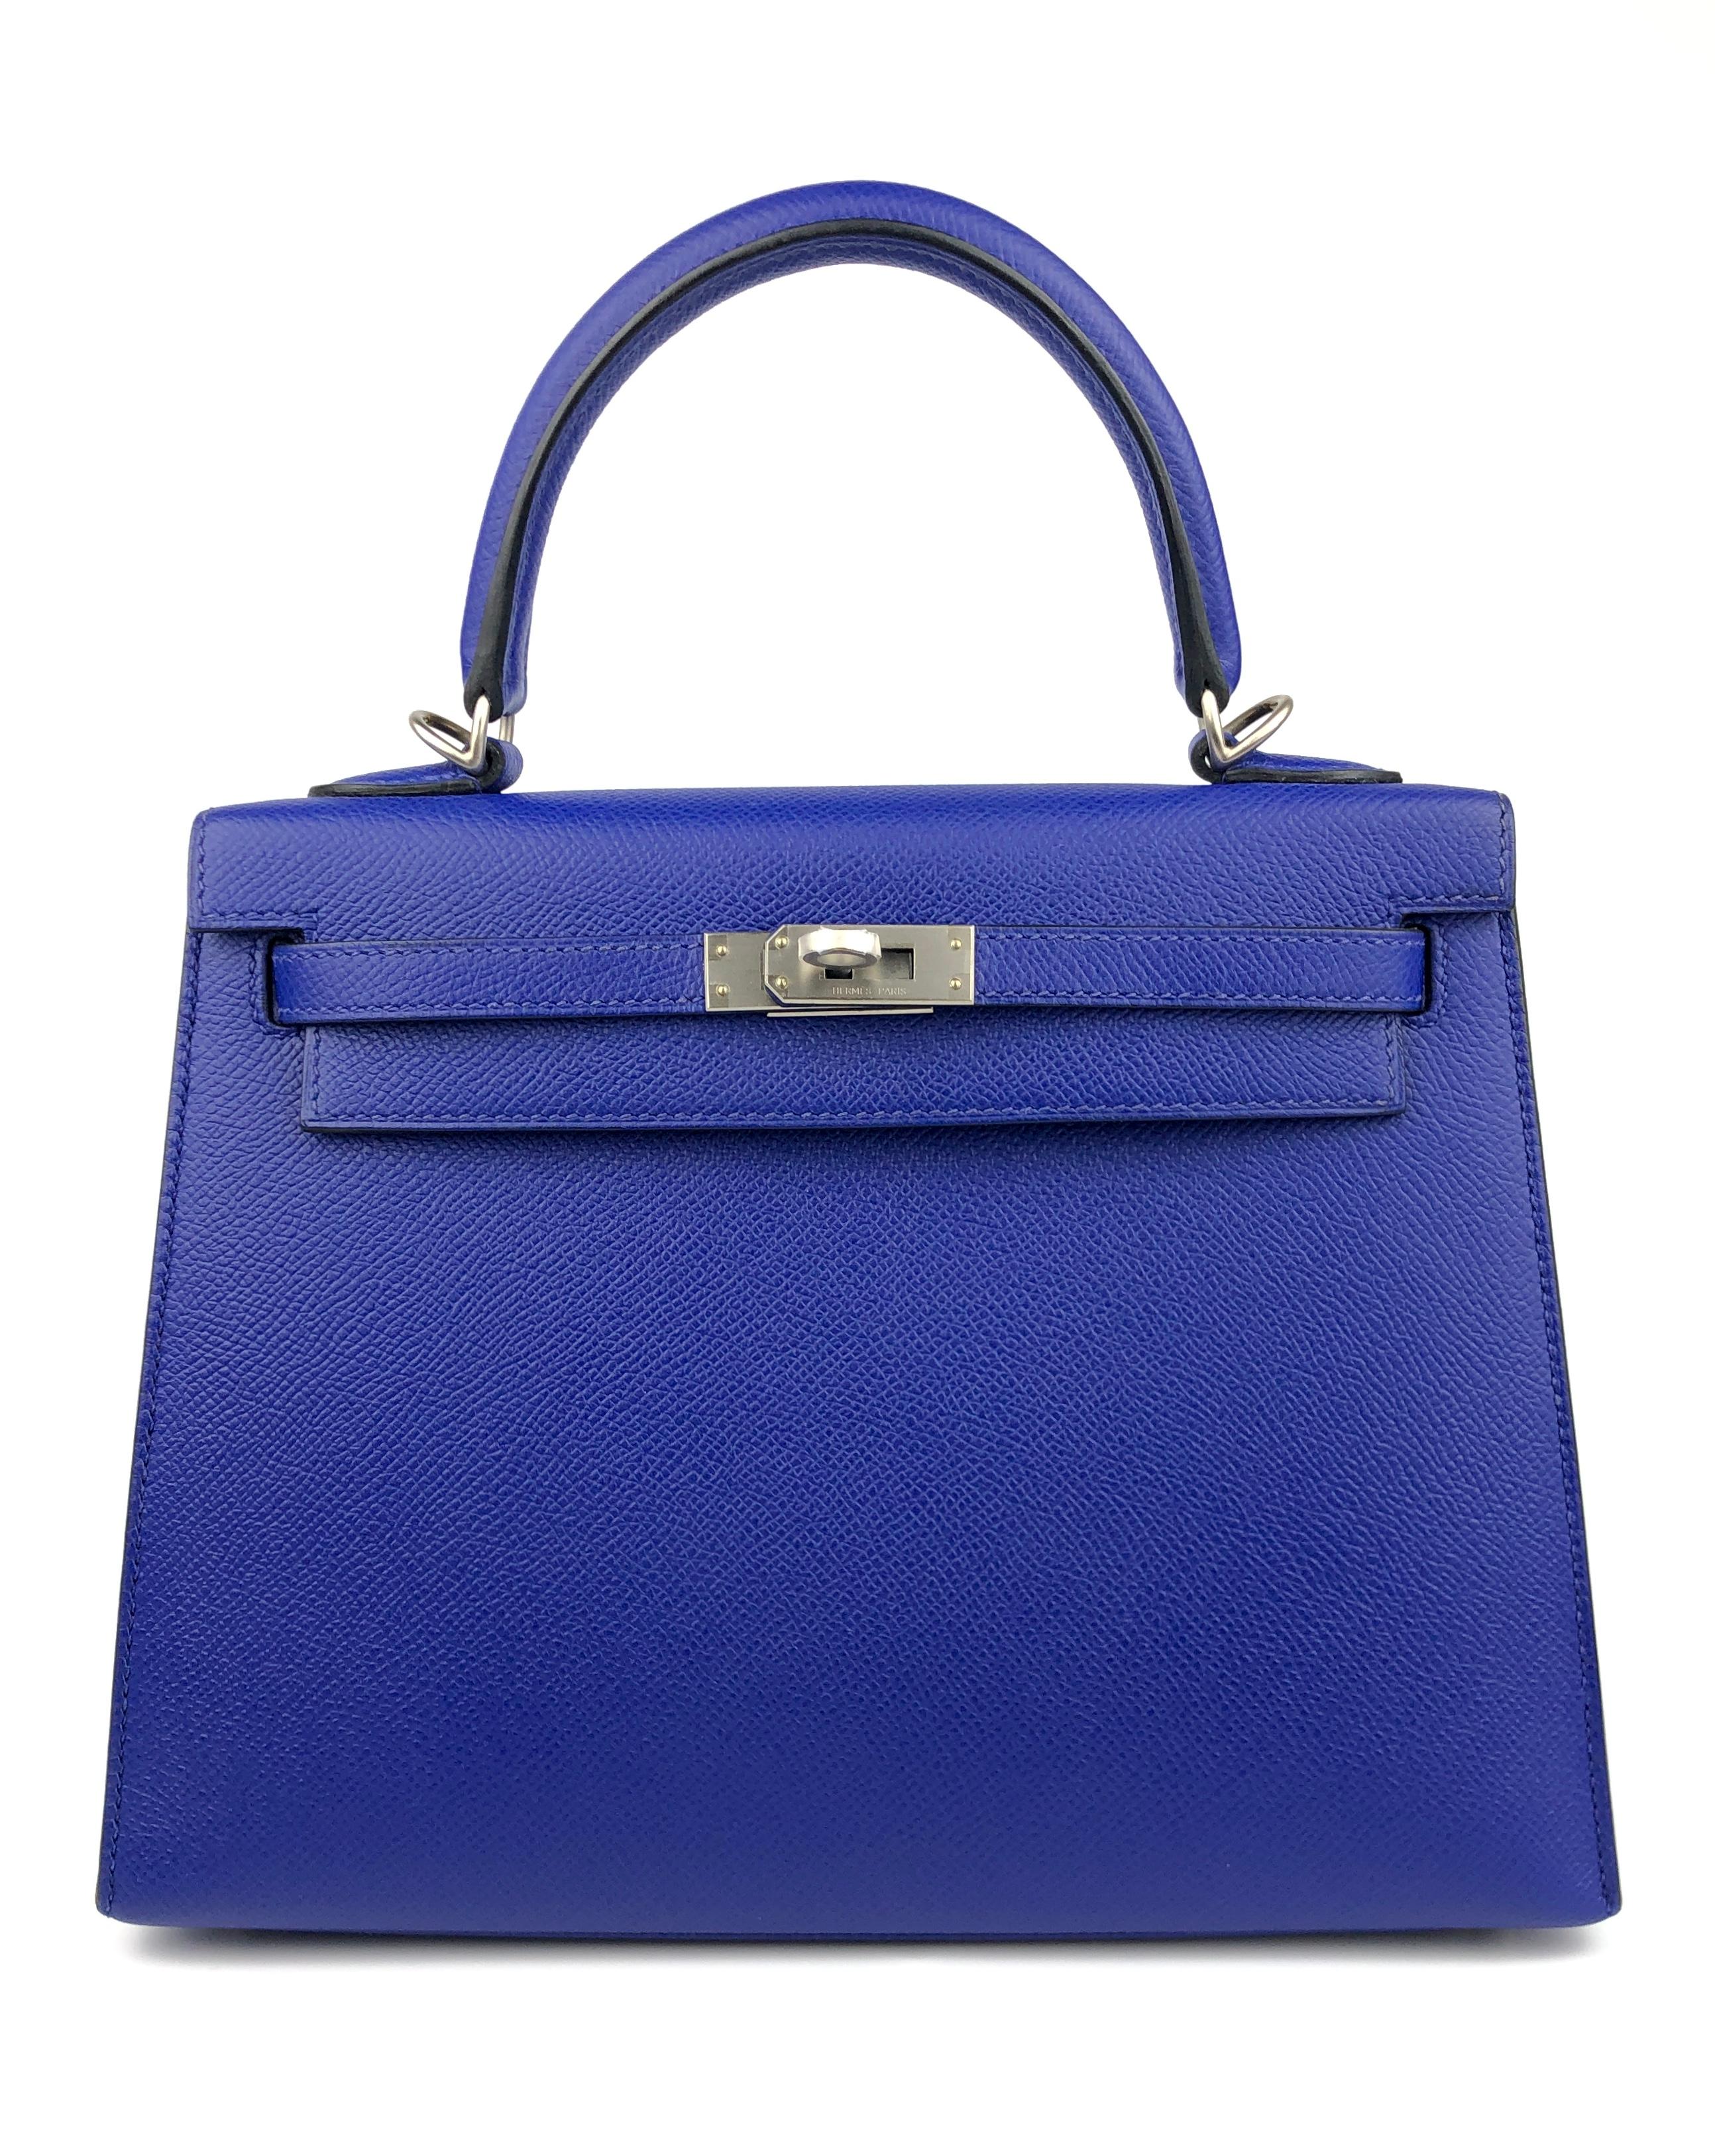 Stunning HSS Special Order 1 of 1 As New  Hermes Kelly 25 Sellier Blue Electric & Gris Mouette Interior Epsom Leather Complimented by Brushed Palladium Hardware. ONLY ONE FOR SALE ON THE MARKET. 
A Stamp 2017.

Shop with Confidence from Lux Addicts.